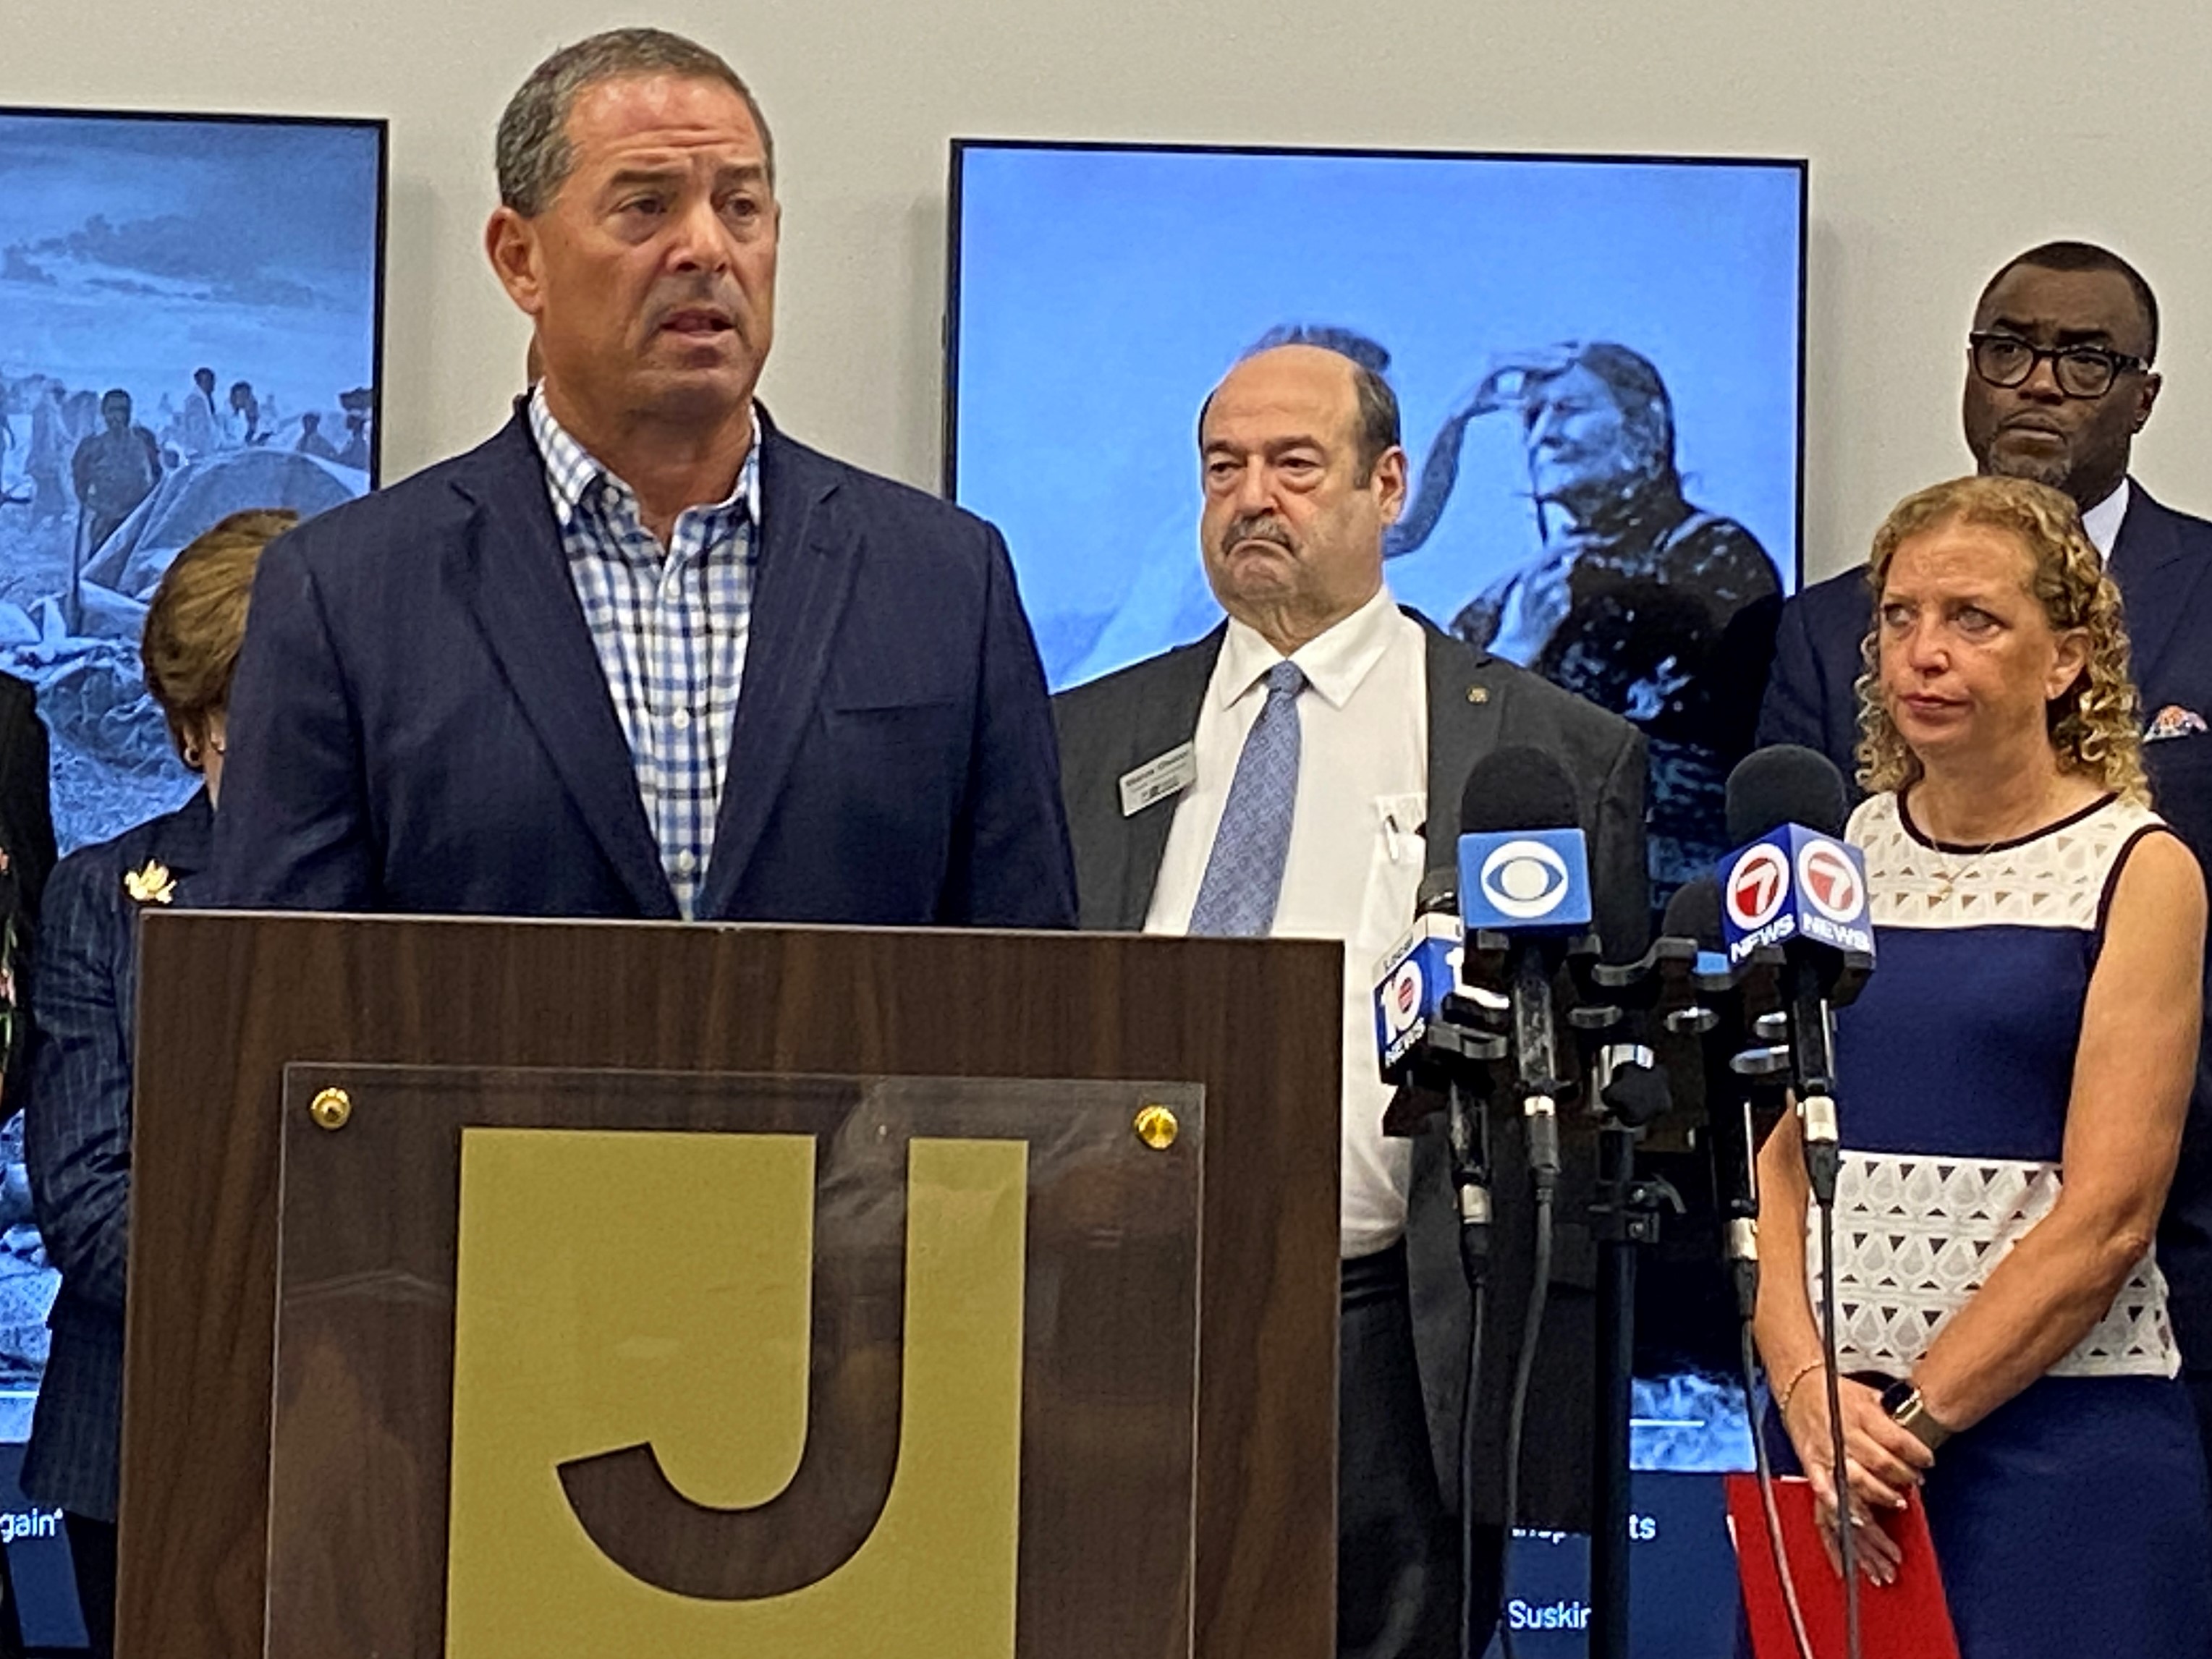 Broward Mayor Michael speaks out against recent acts of antisemitism and racism at a news conference today with other elected officials, community members, and religious leaders.